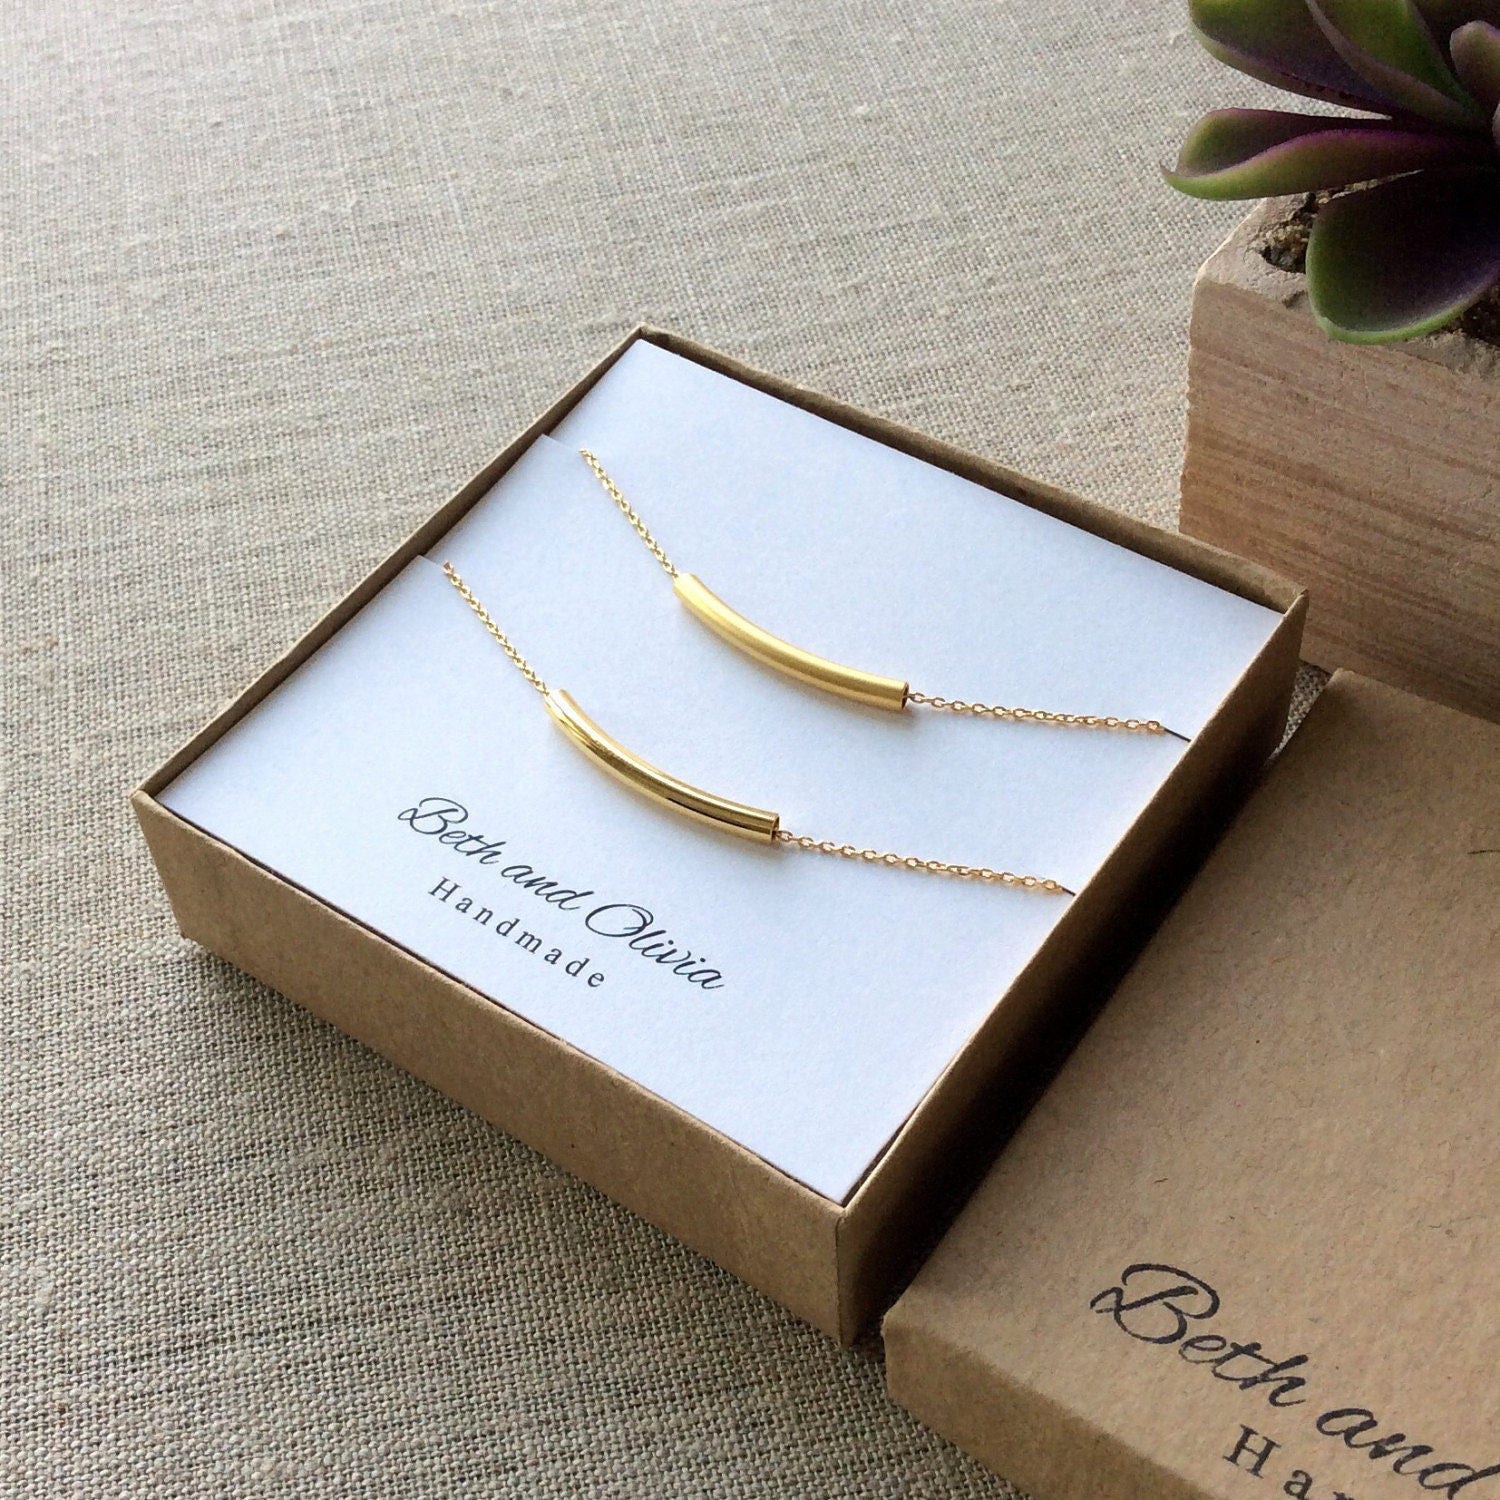 Gold tube necklace set, sisters necklace set, best friend necklace set, twins jewelry, curved tube pendant, simple necklace, casual wear